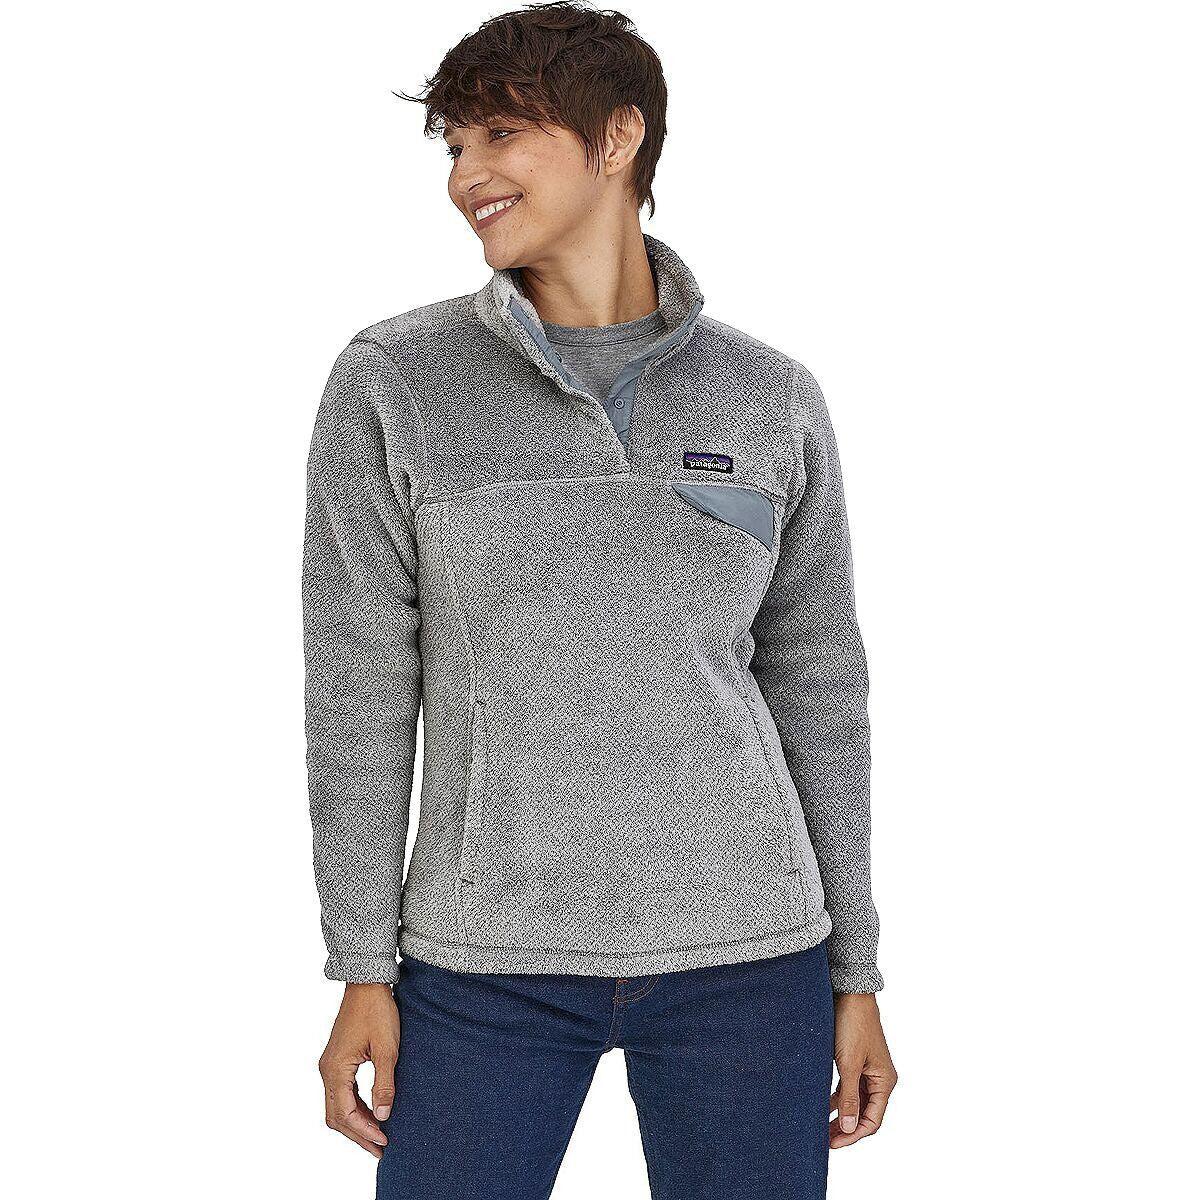 Patagonia Women's RE-TOOL Snap-T Fleece Pullover